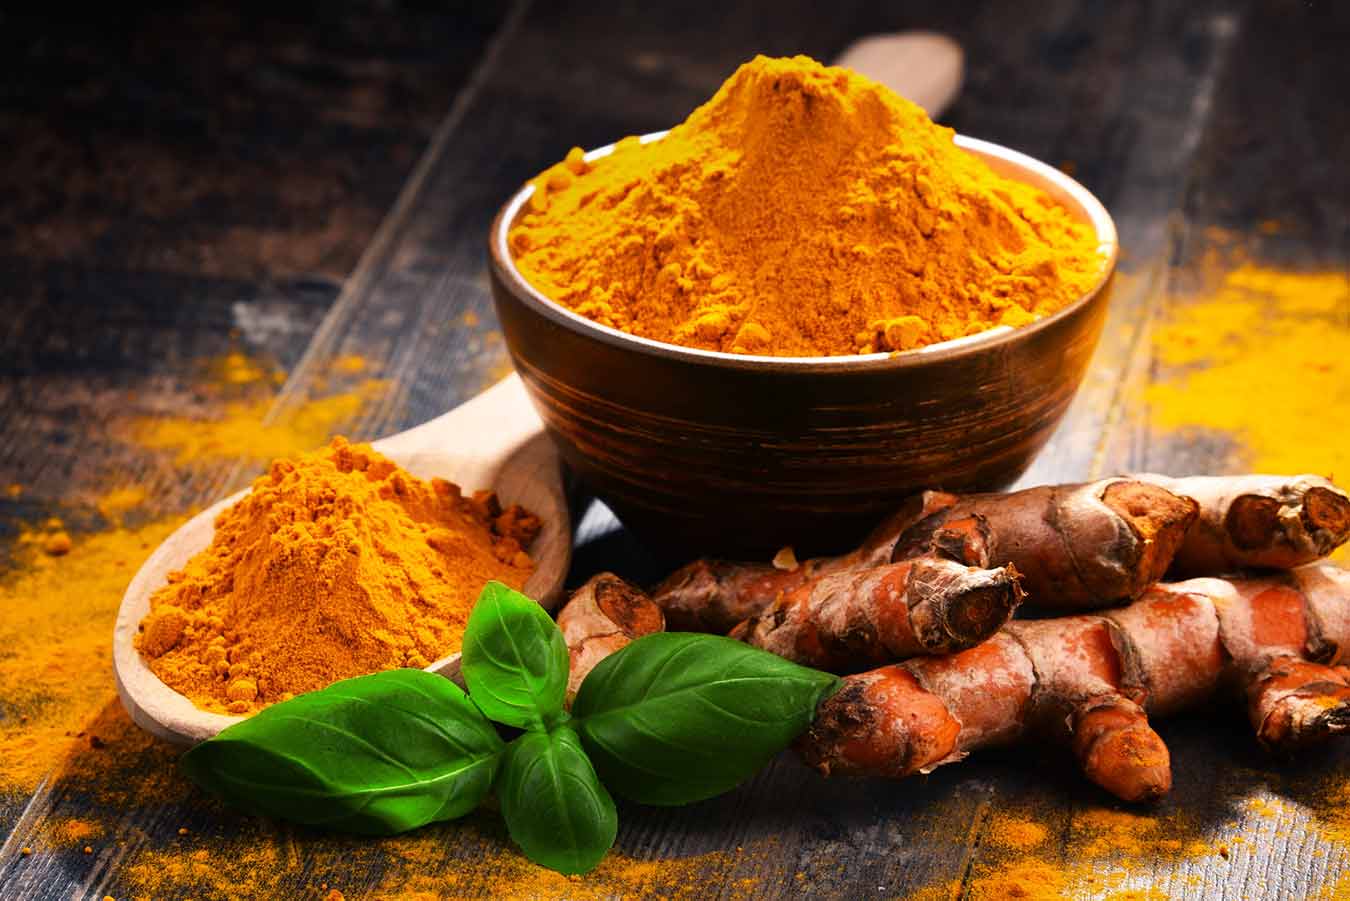 Organic Turmeric Powder Spices and Luxury 1 kg Yellow UAE Organic Turmeric  Powder. | Wholesale | Tradeling